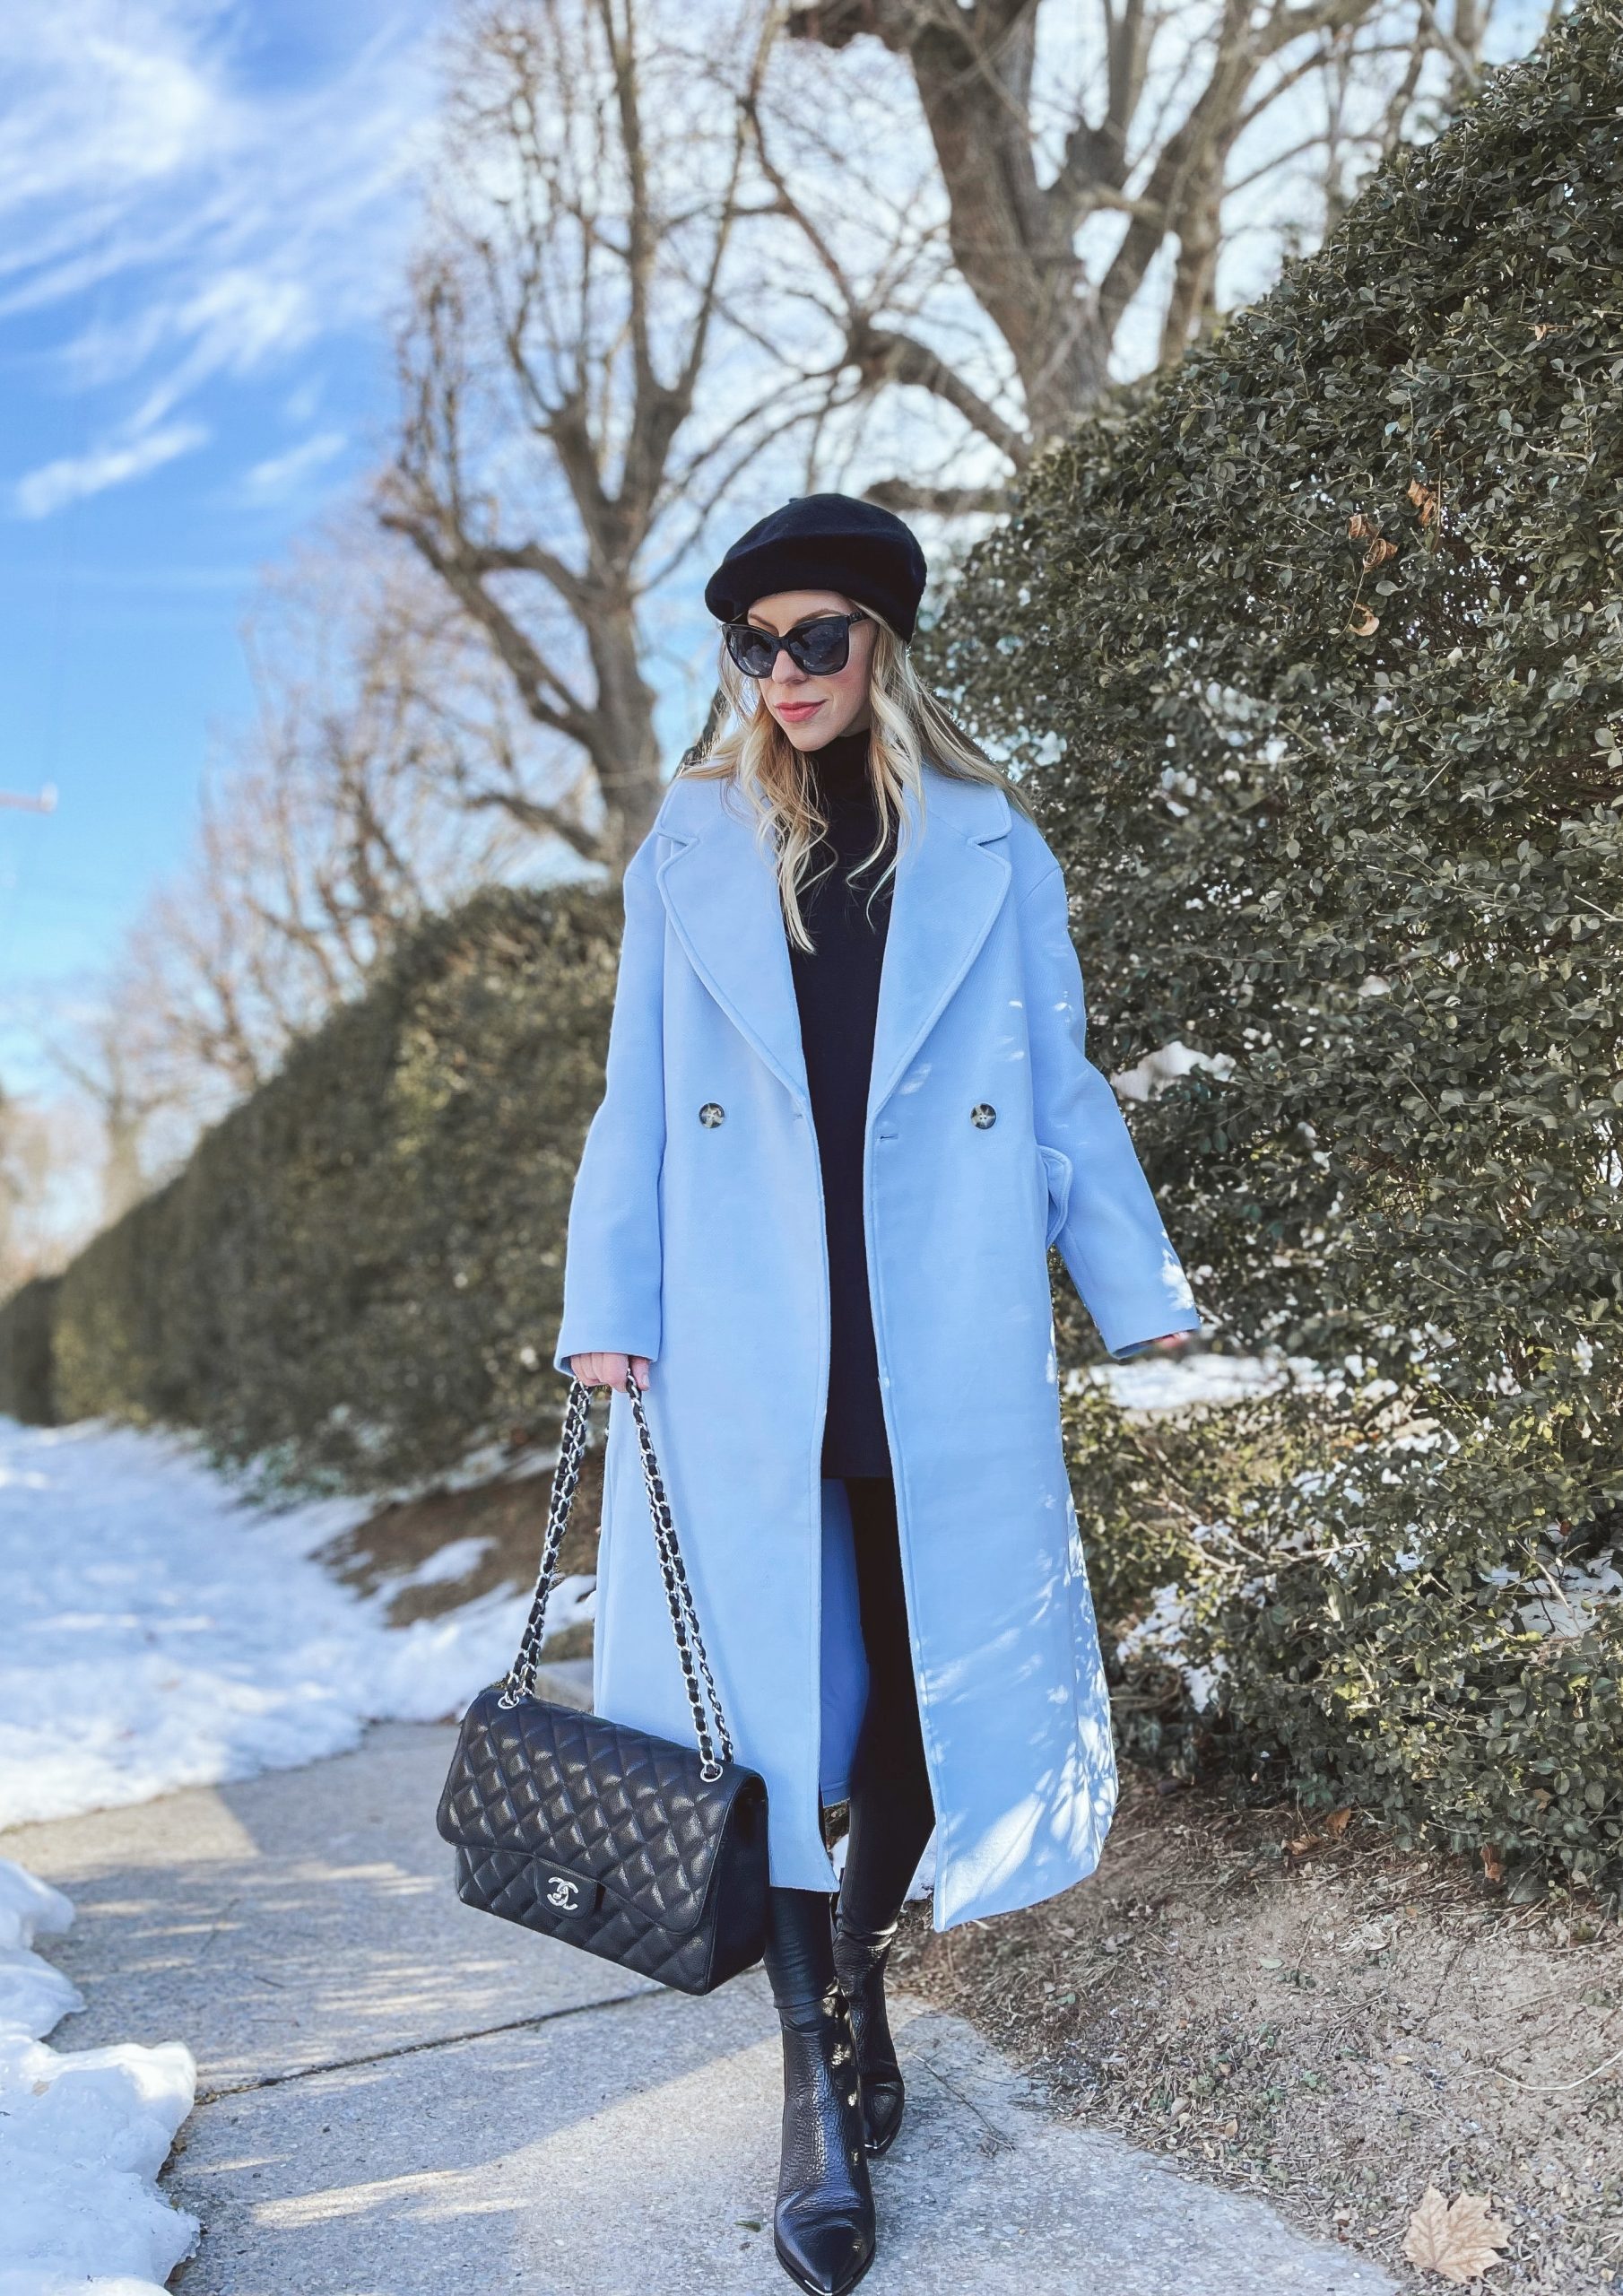 Styling Bright Blue Winter Coats - The Mom Edit